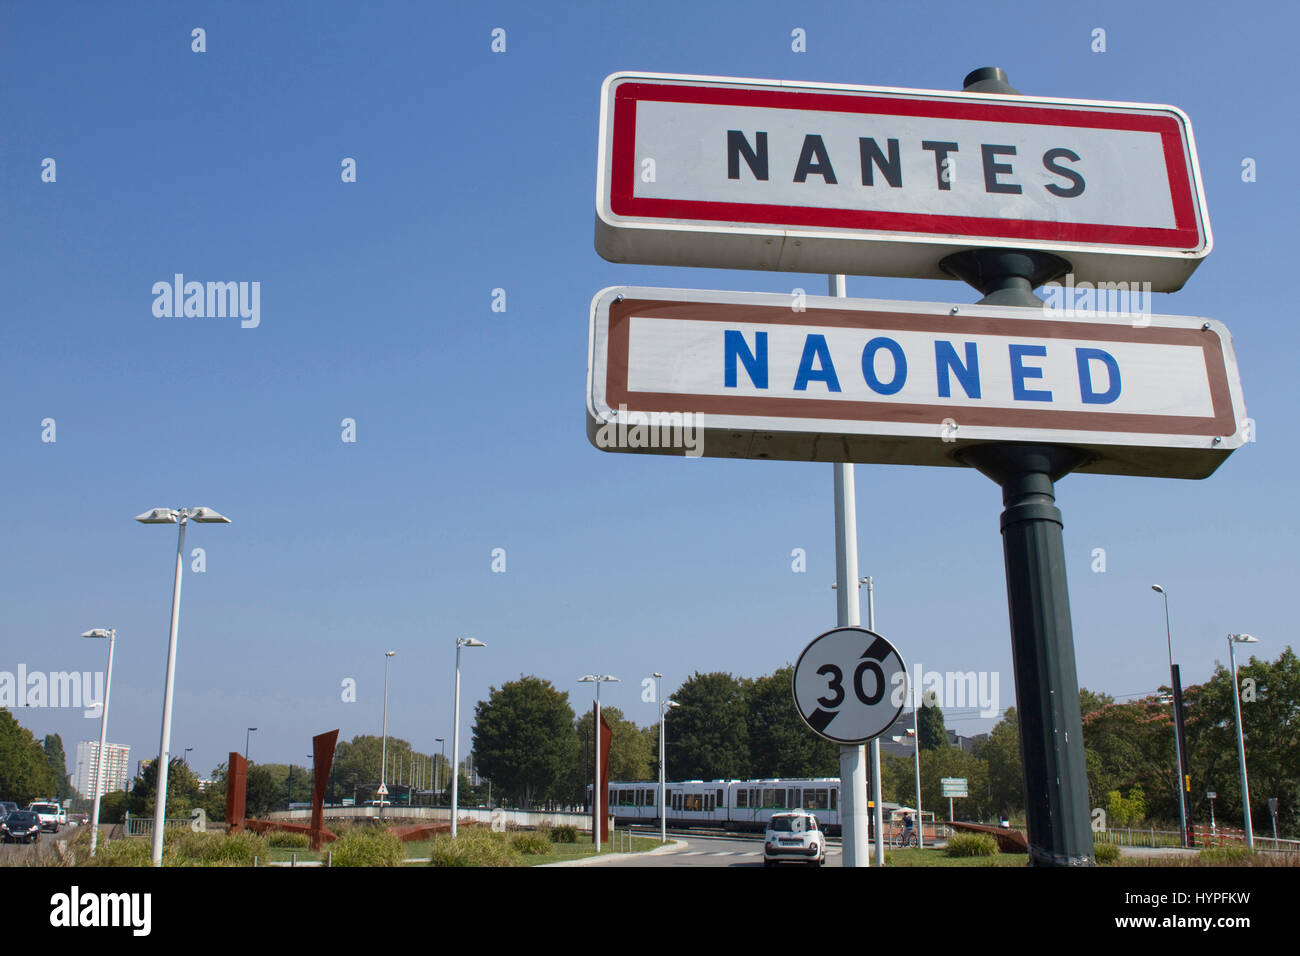 France, Nantes, road signs in French and Breton. Stock Photo